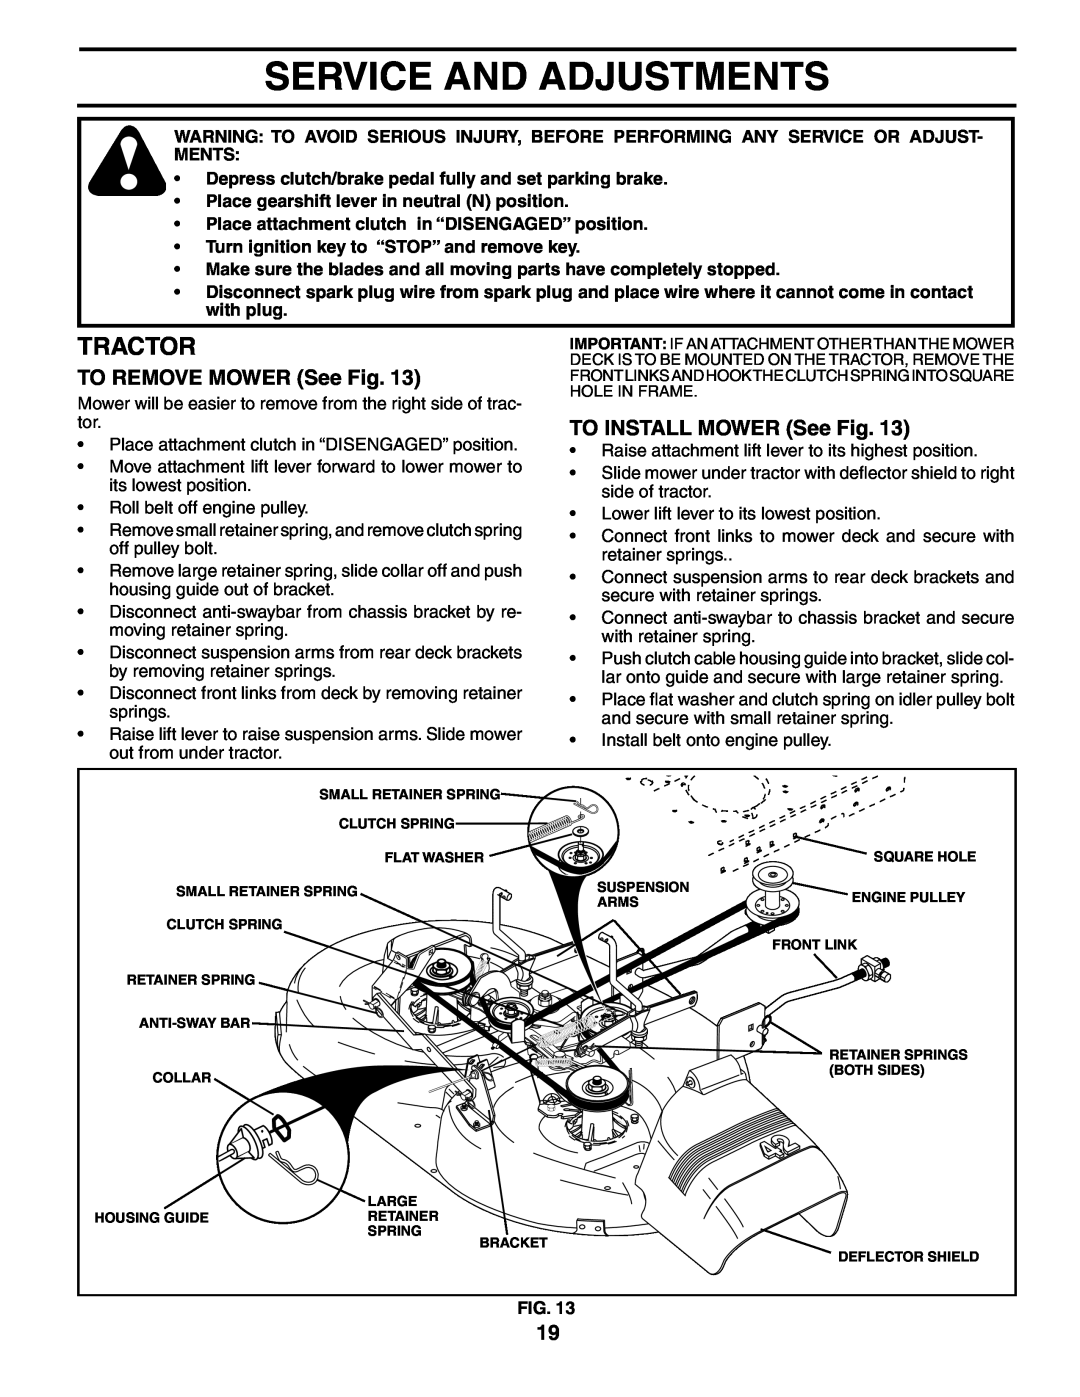 Poulan 195506 manual Service And Adjustments, TO REMOVE MOWER See Fig, TO INSTALL MOWER See Fig, Tractor 